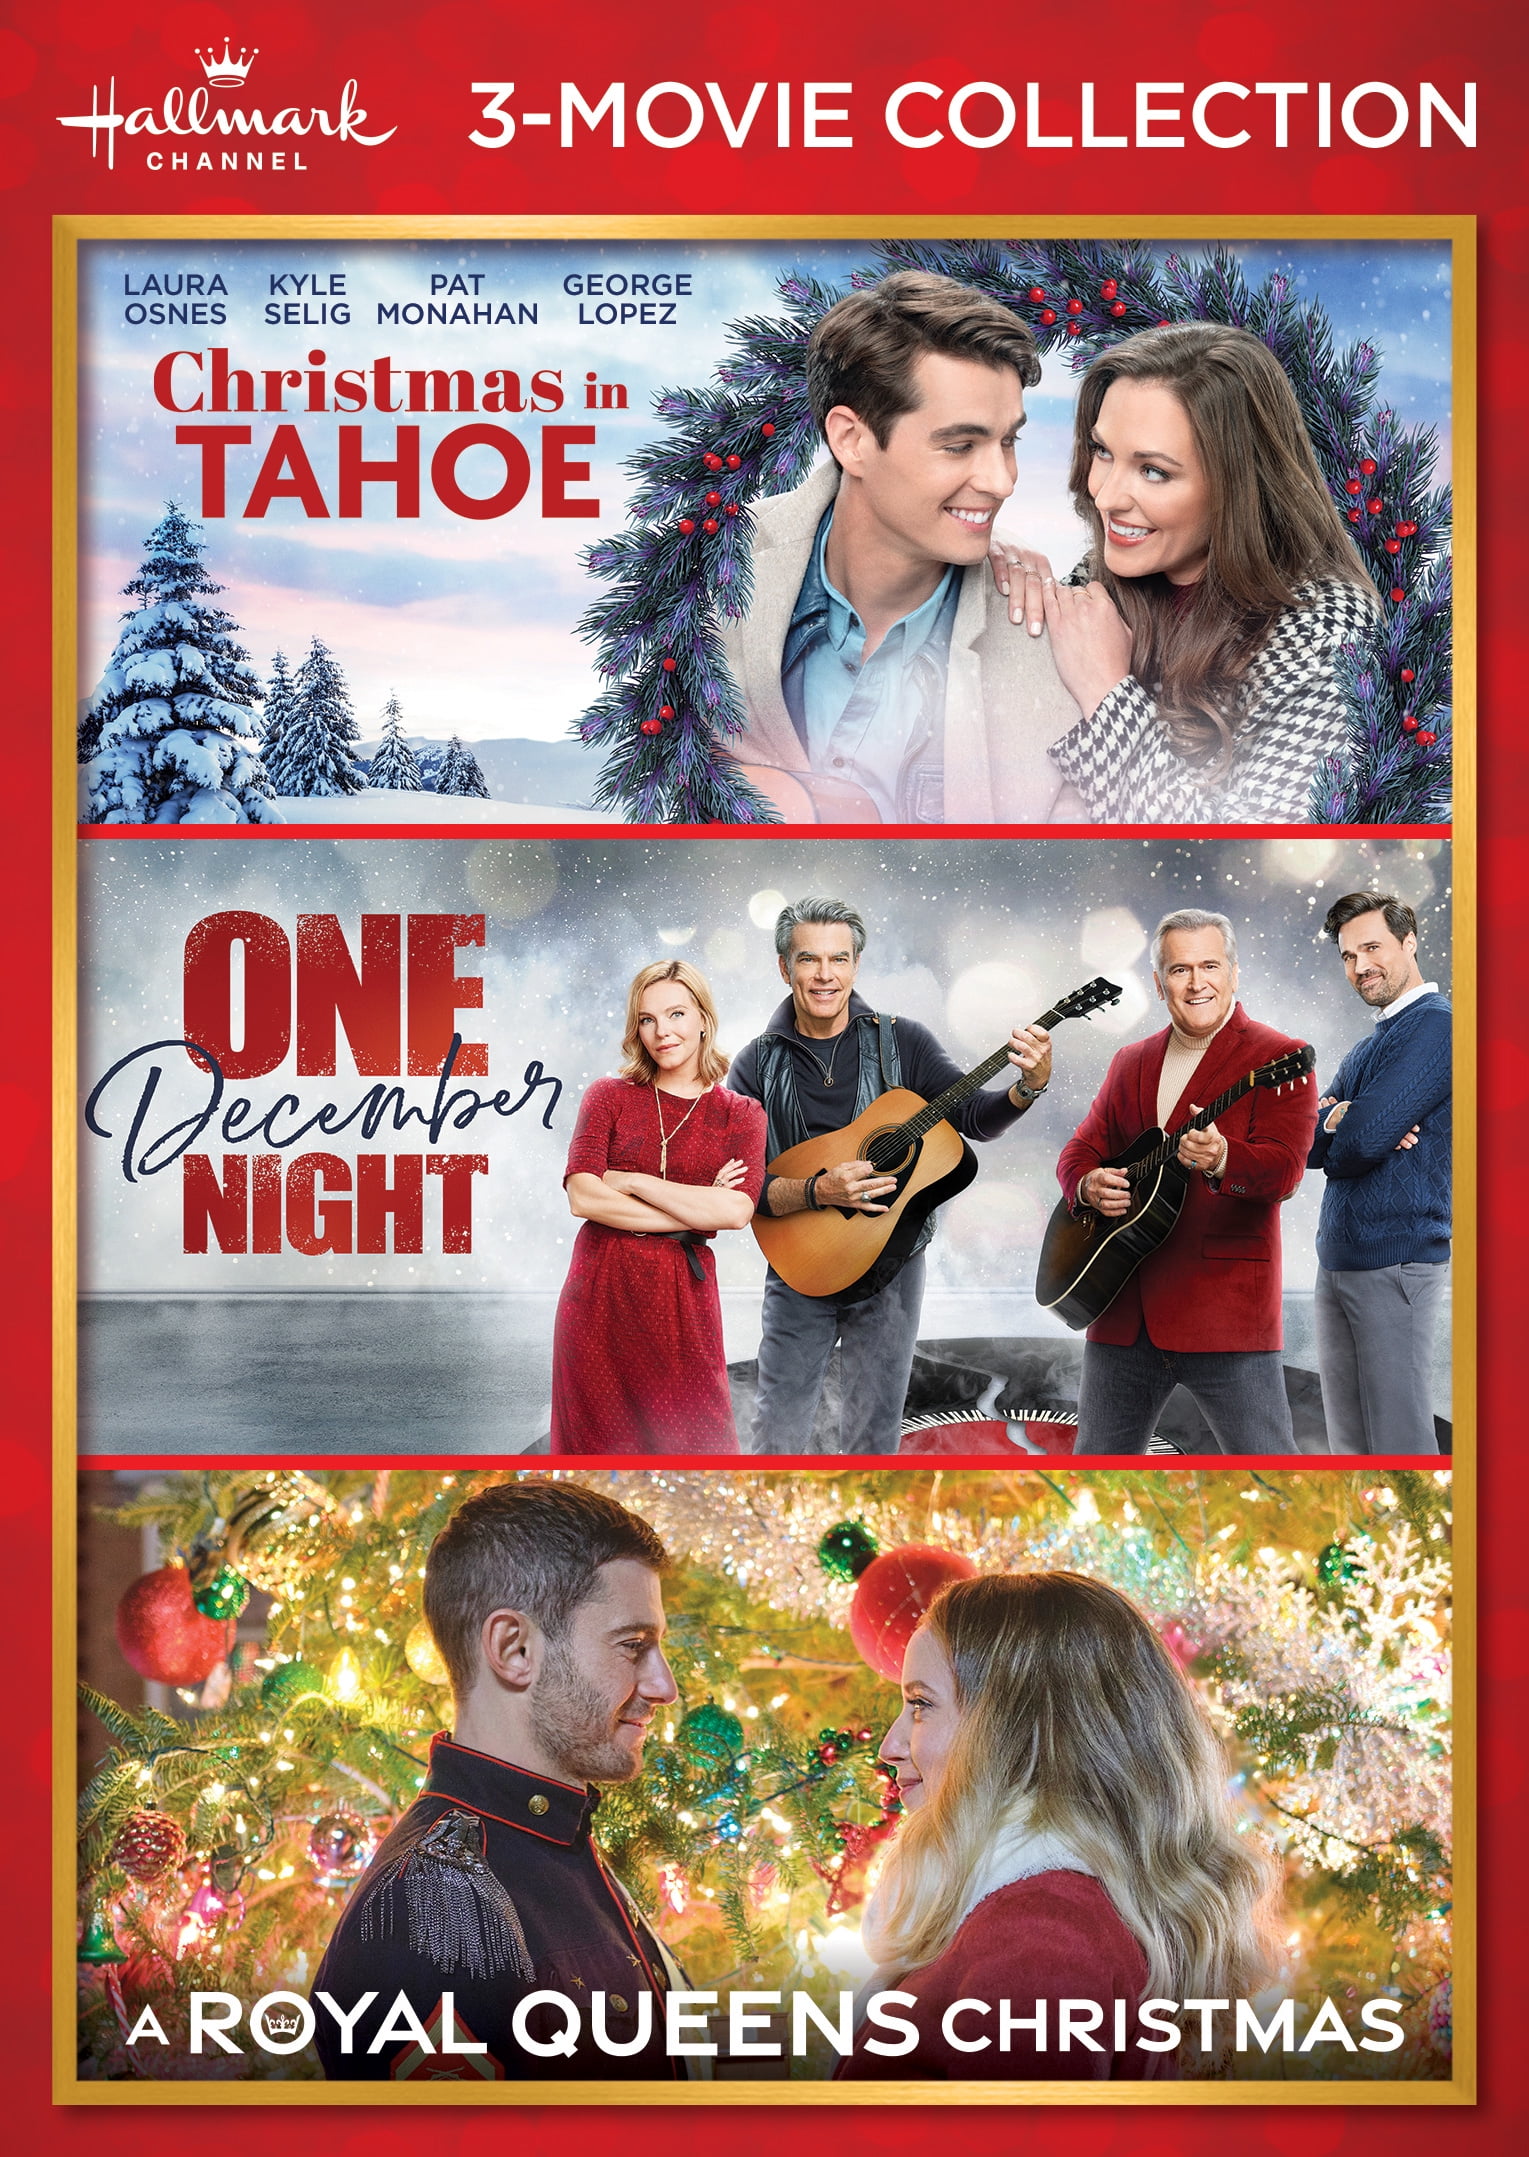 Hallmark 3-Movie Collection: Christmas In Tahoe/ One December Night/ A Royal Queens Christmas (DVD)